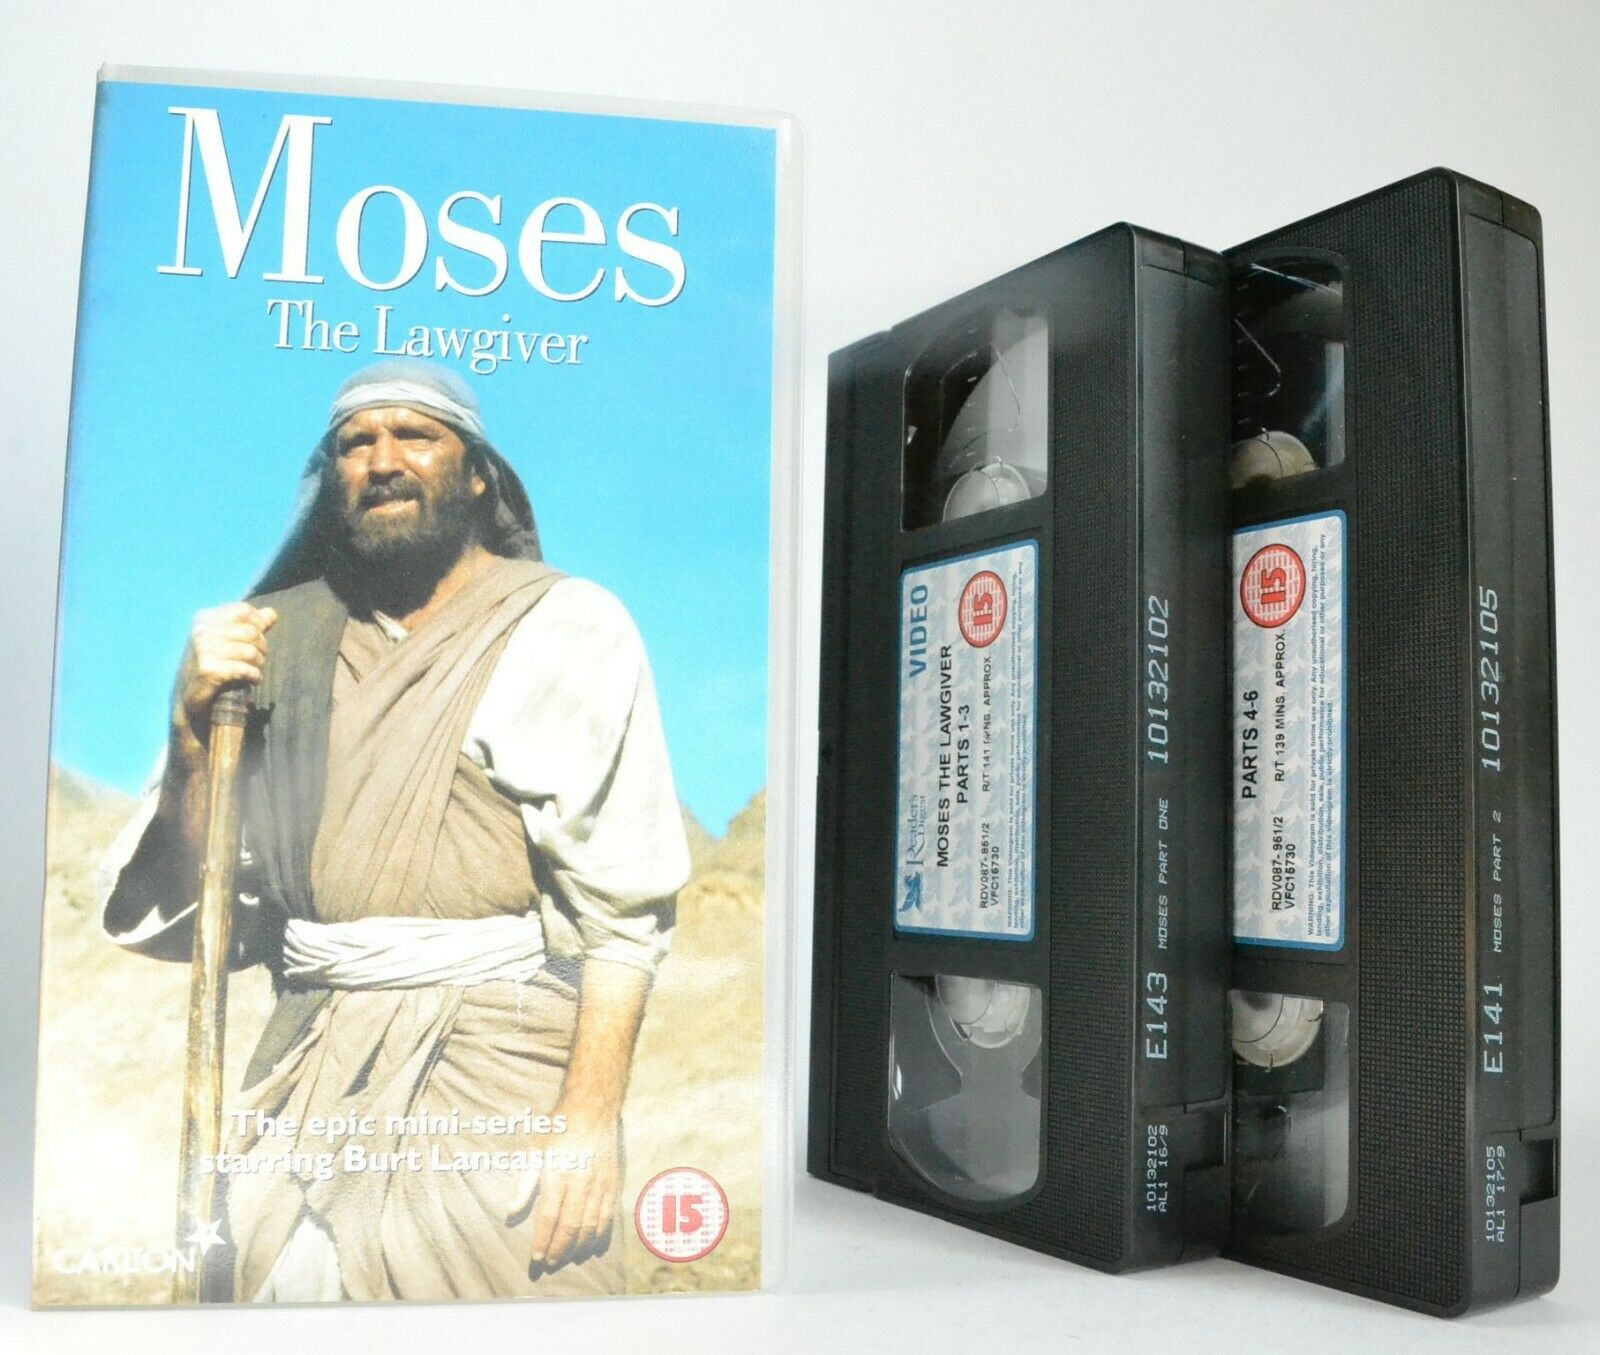 Moses: The Lawgiver - (1974) Miniseries - Bibilical Drama - Burt Lancaster - VHS-